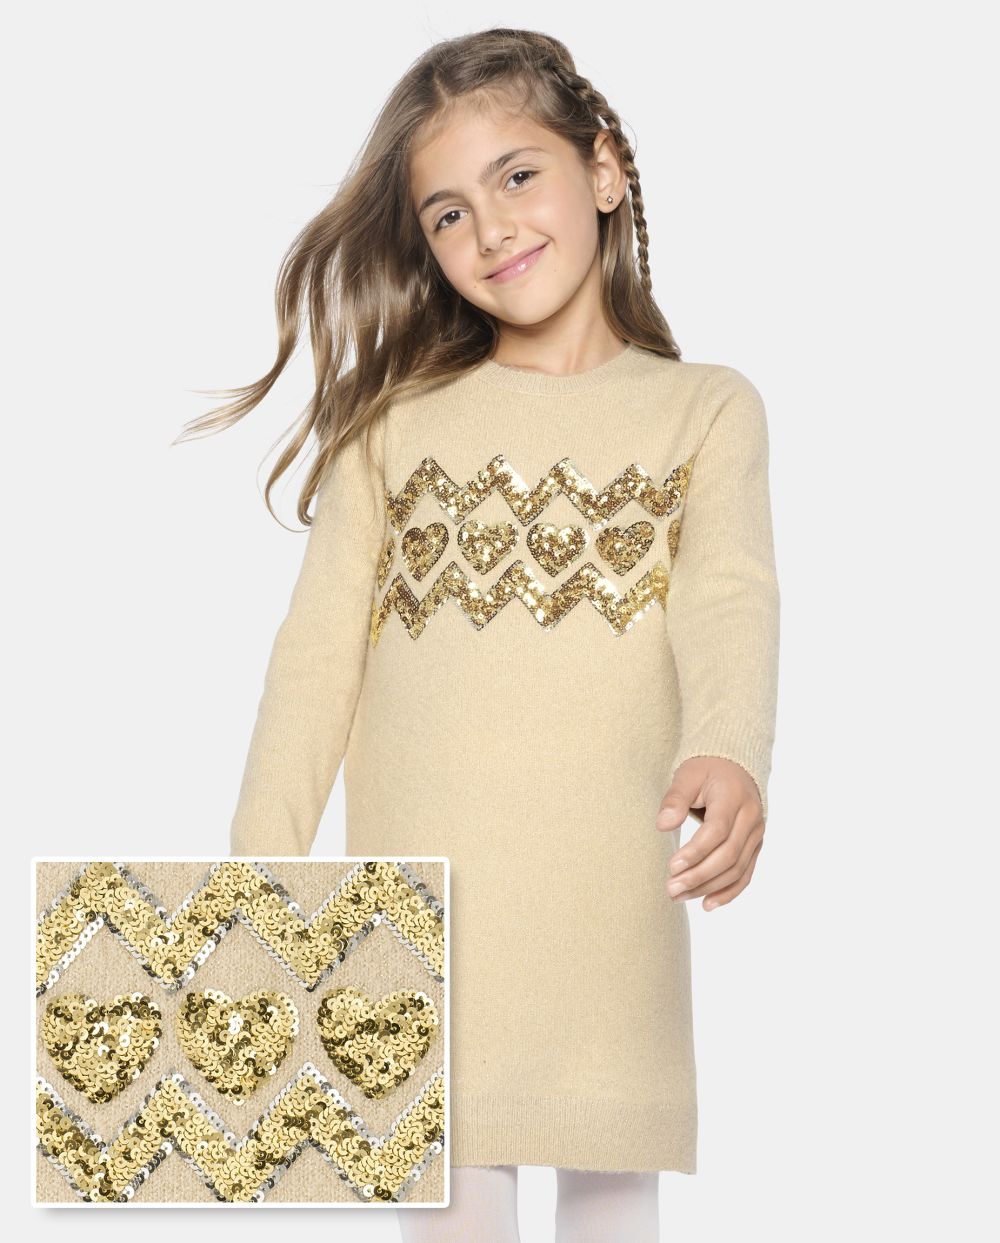 Tall Girls Zig Zag Print Long Sleeves Sequined Sweater Crew Neck Above the Knee Dress